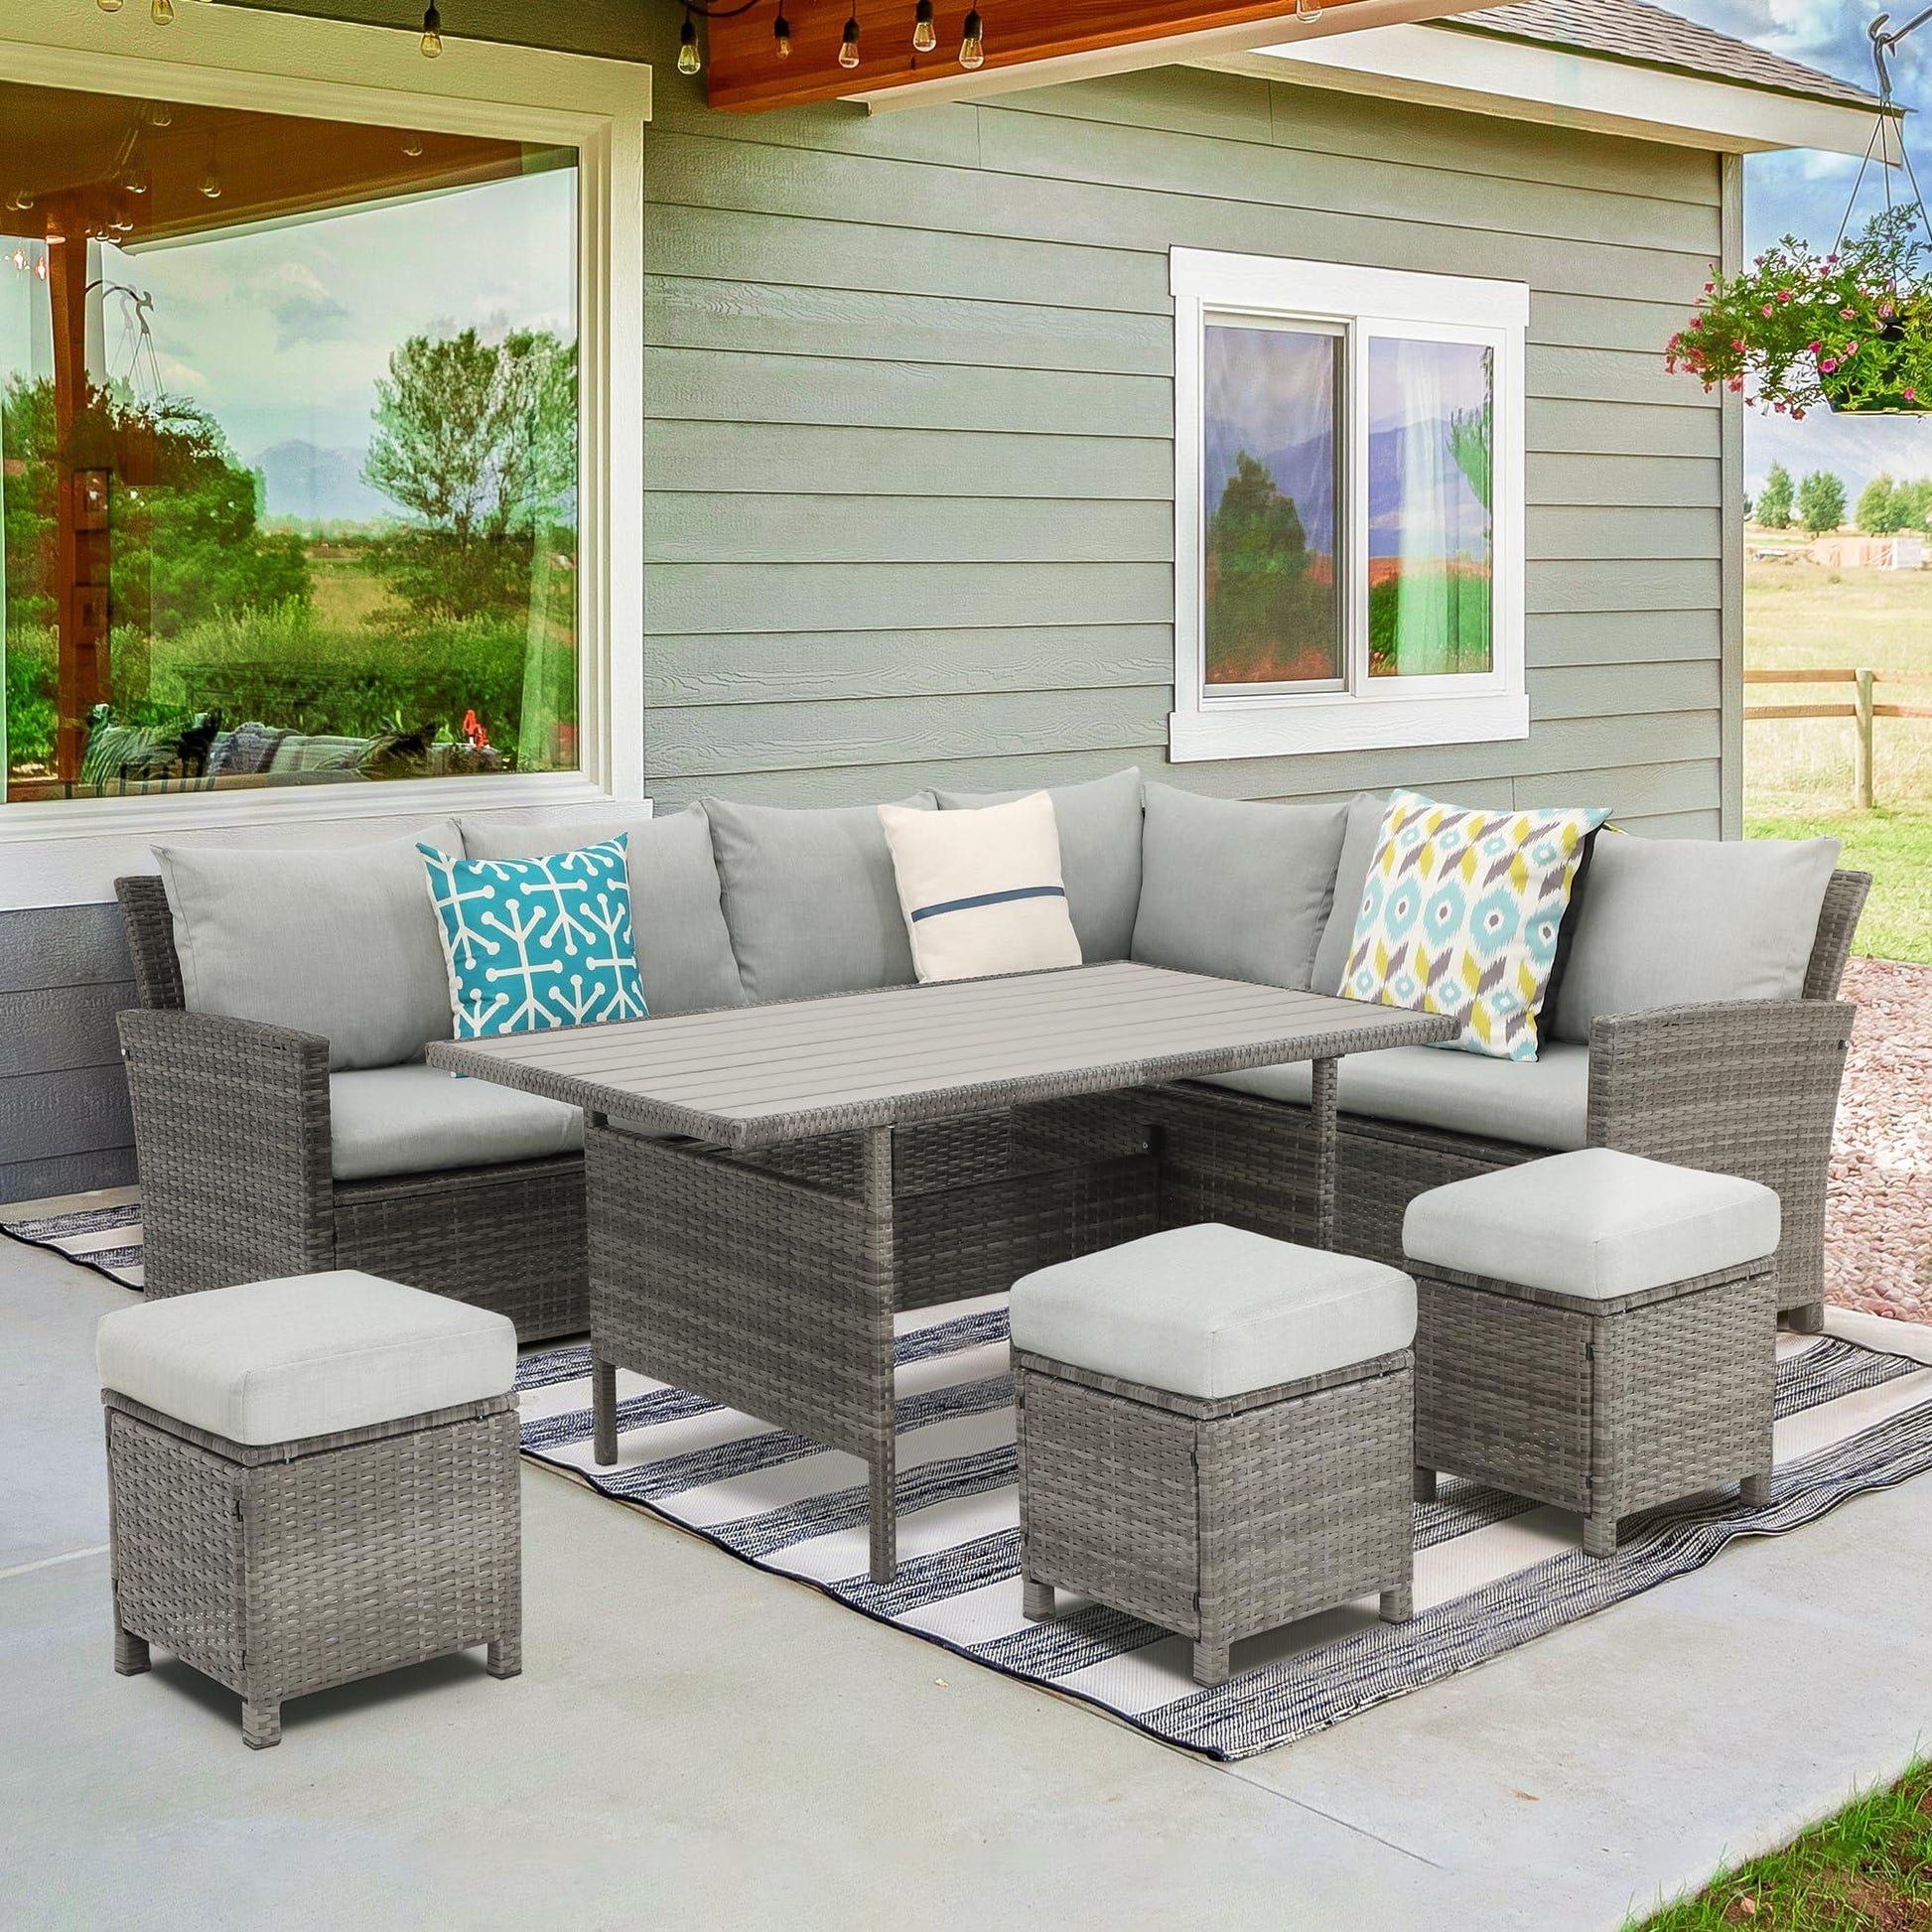 Wisteria Lane Patio Furniture Set, 7 Piece High Curved Back Outdoor Dining Sectional Sofa with Dining Table and Chair, All Weather Wicker Conversation Set with Ottoman, Grey - CookCave